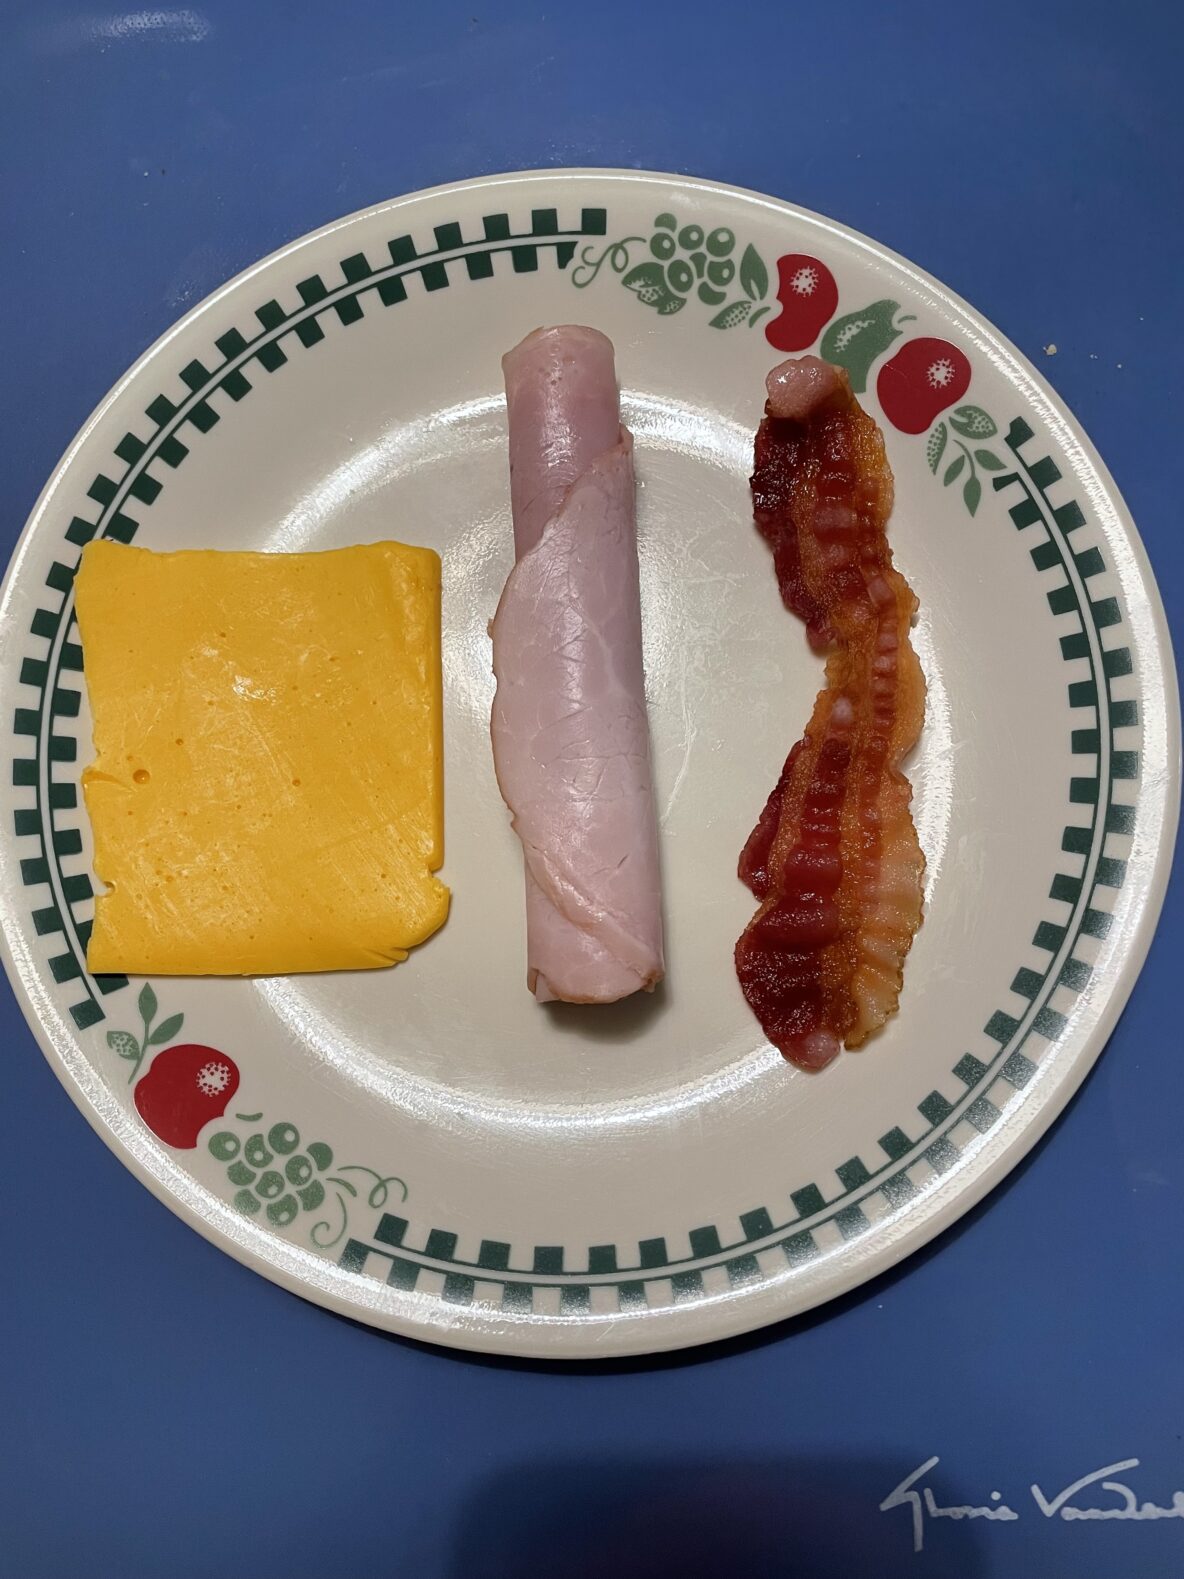 Cheese, ham, and bacon on a plate